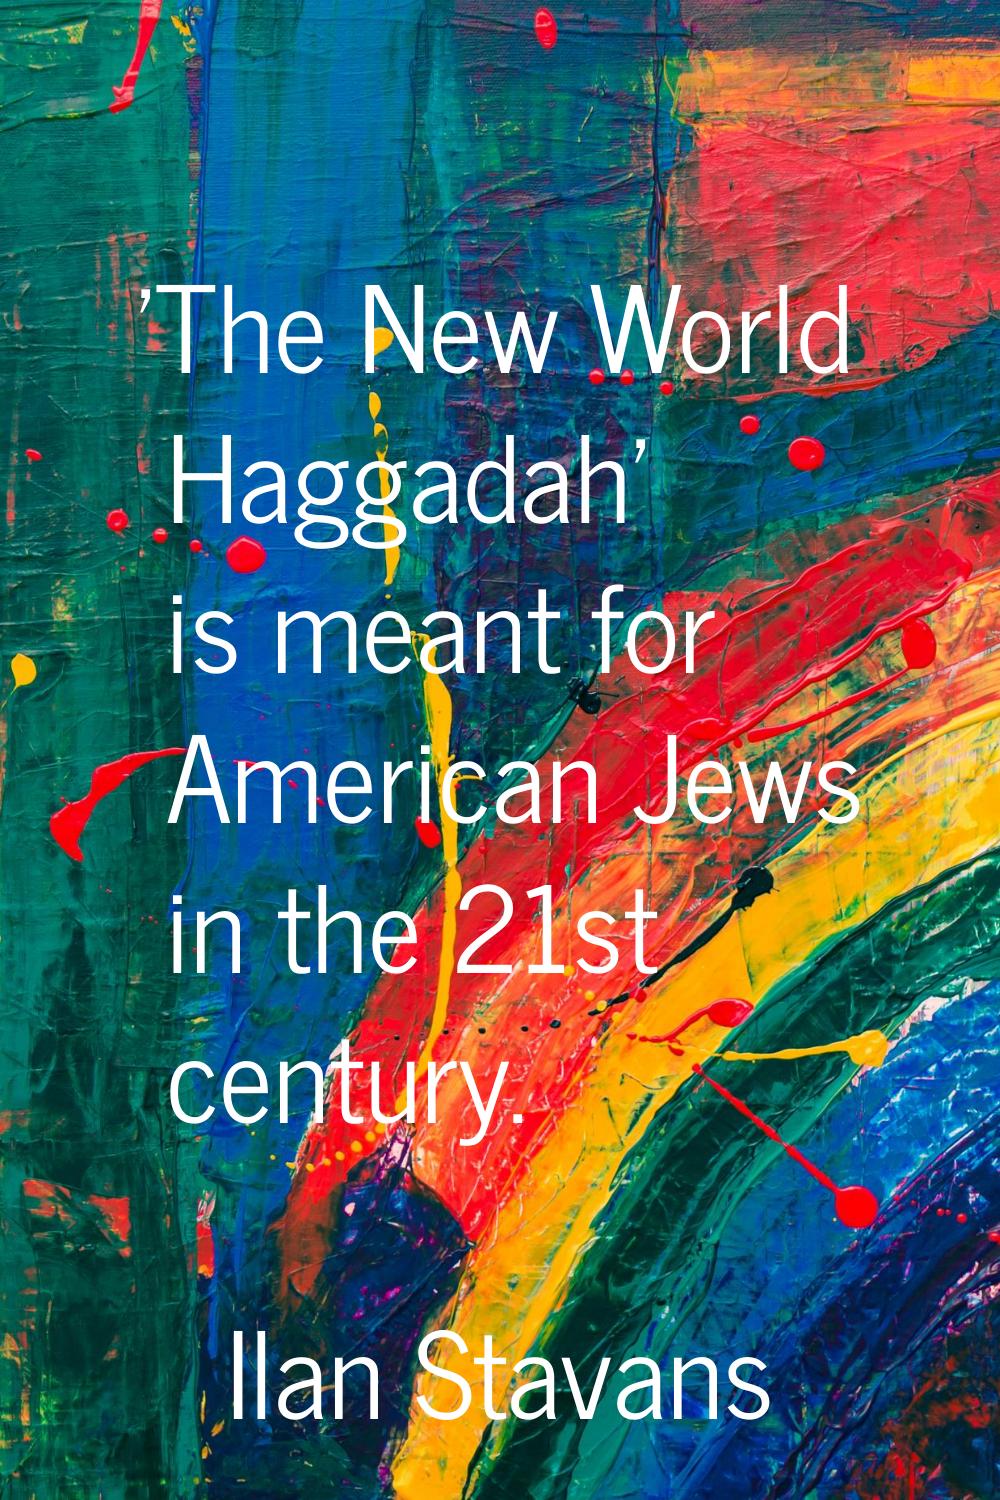 'The New World Haggadah' is meant for American Jews in the 21st century.